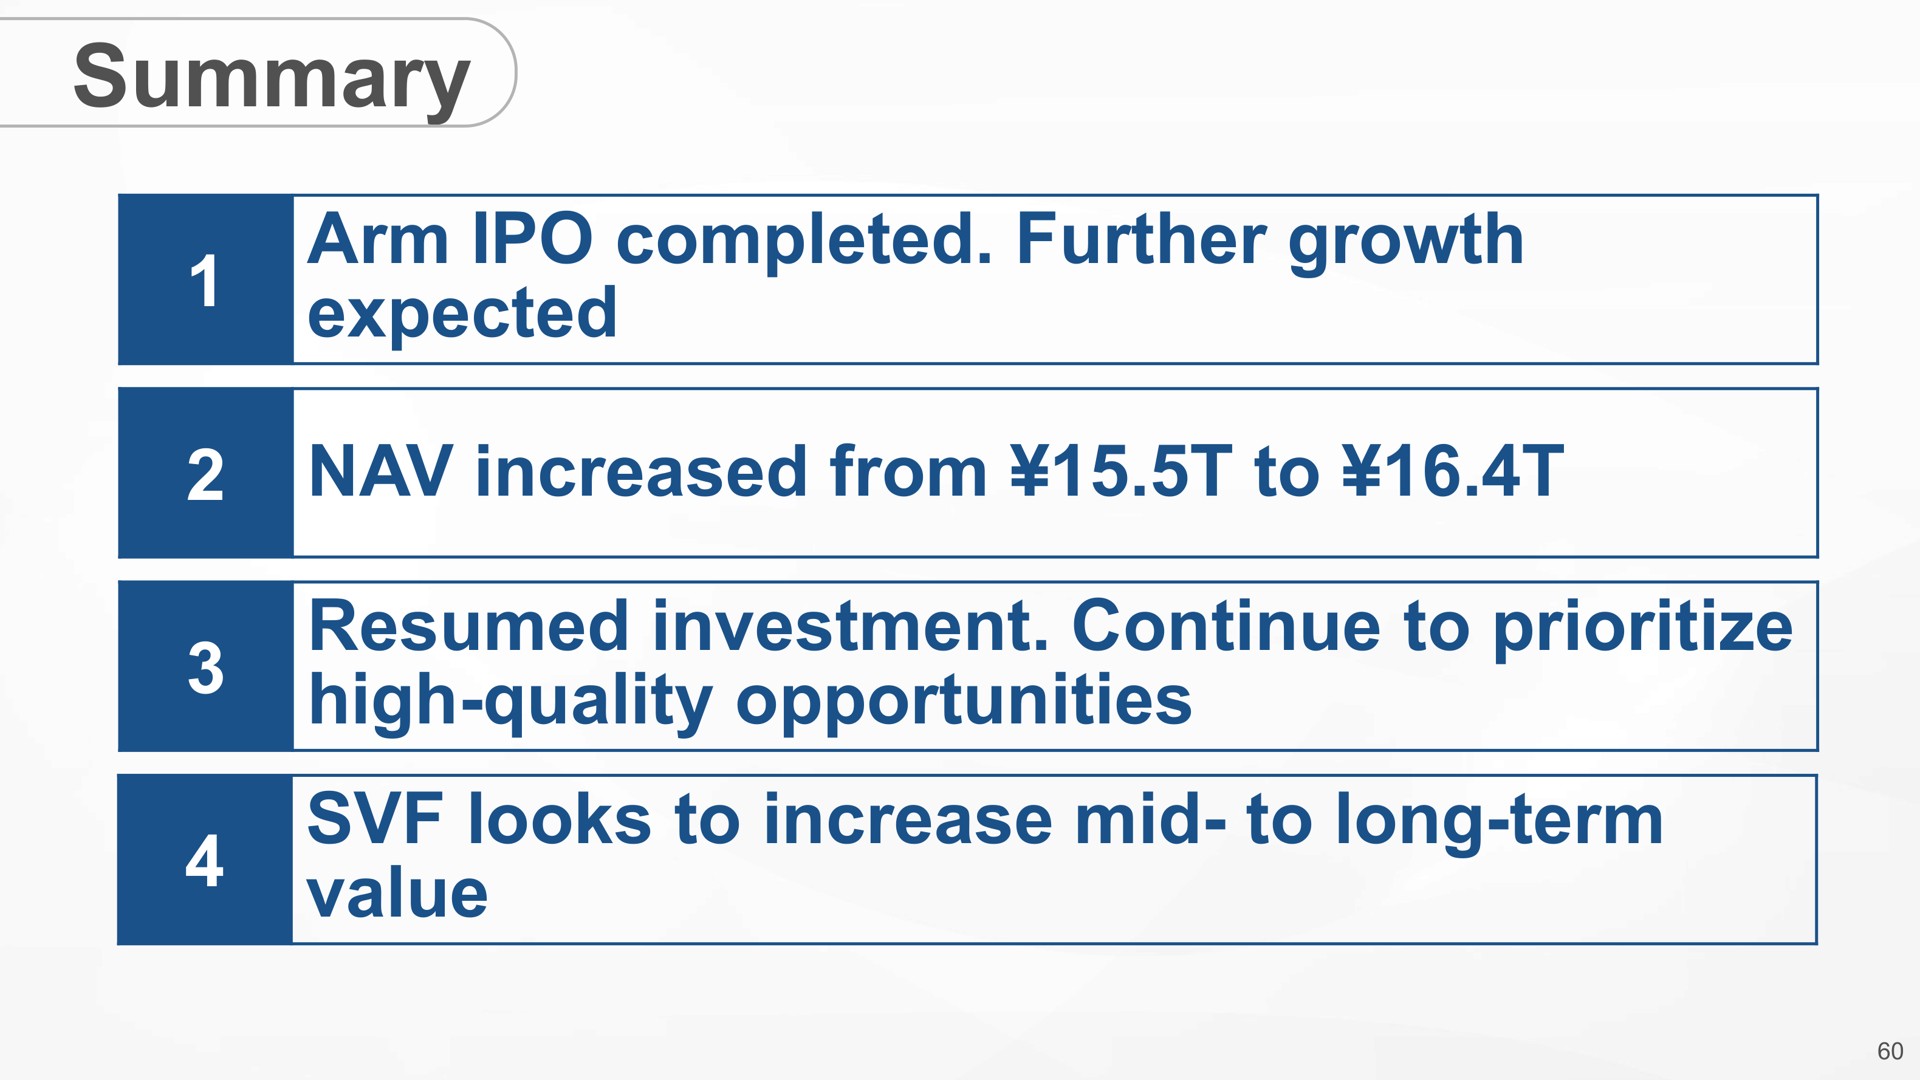 summary arm completed further growth expected increased from to resumed investment continue to high quality opportunities looks to increase mid to long term value | SoftBank